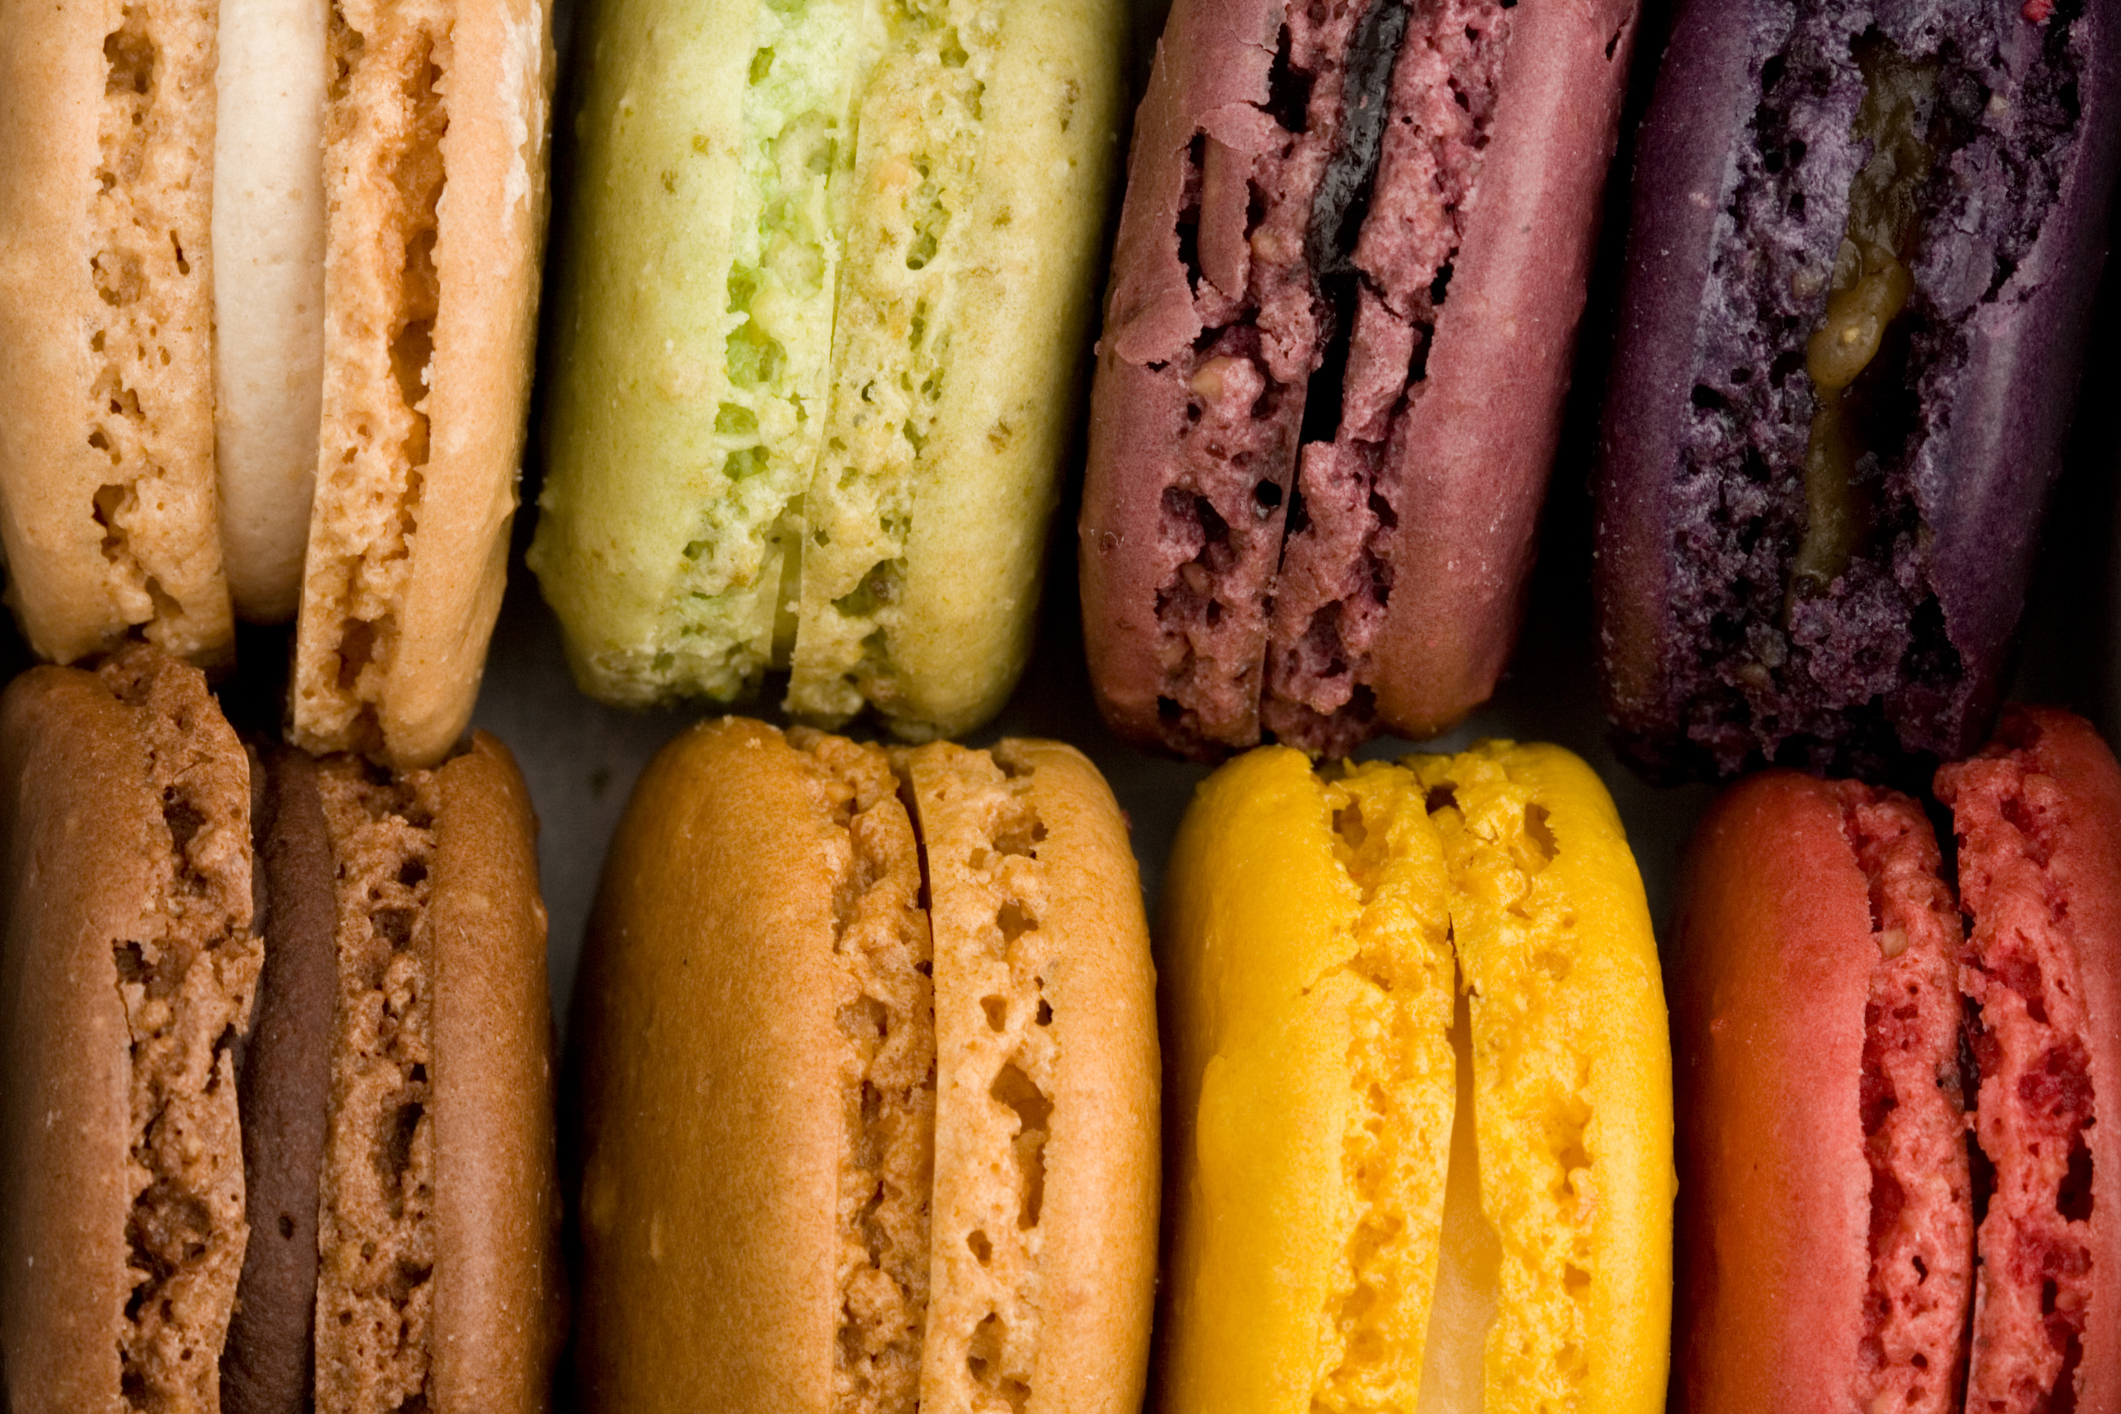 Assorted macarons arranged in two rows, displaying different flavors